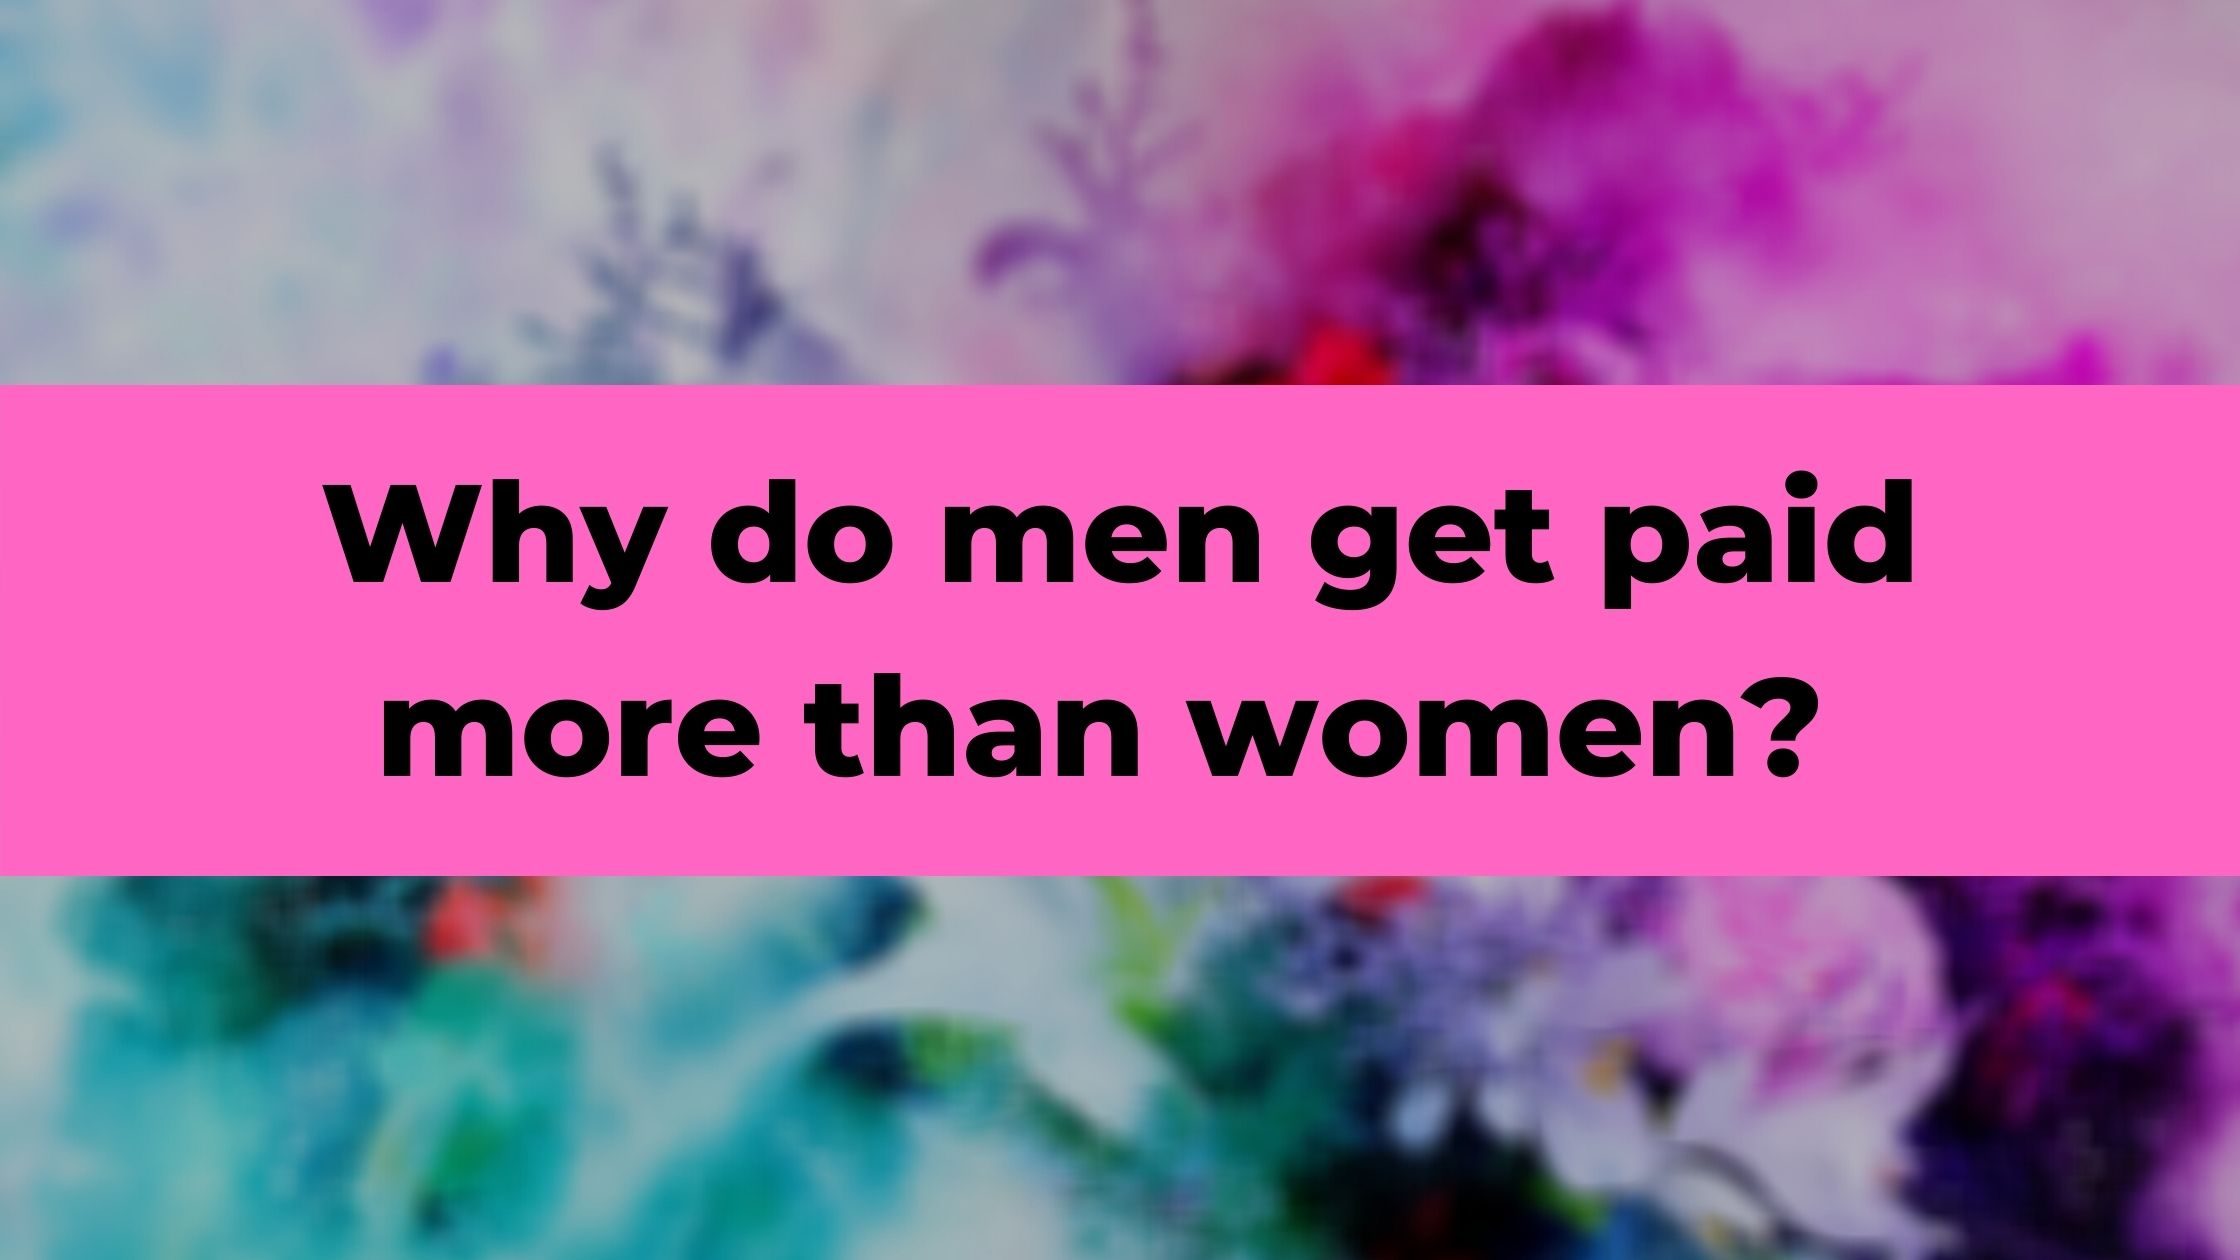 Why do men get paid more than women?